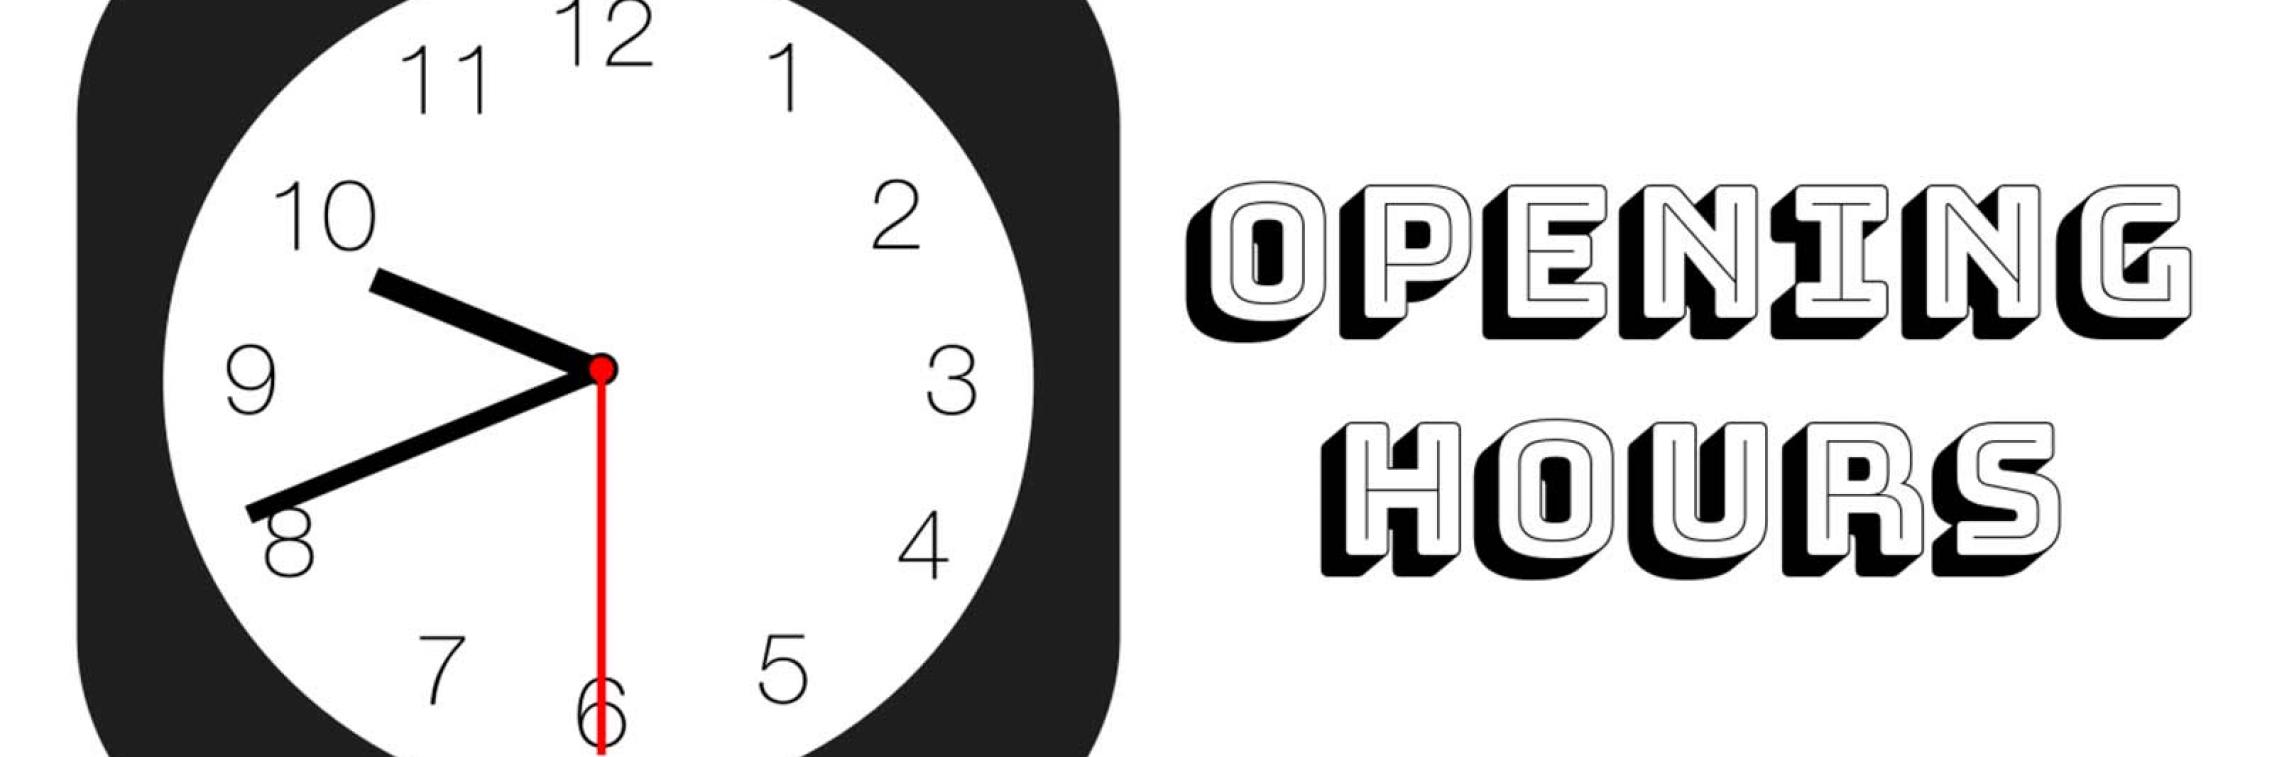 Opening hours clock